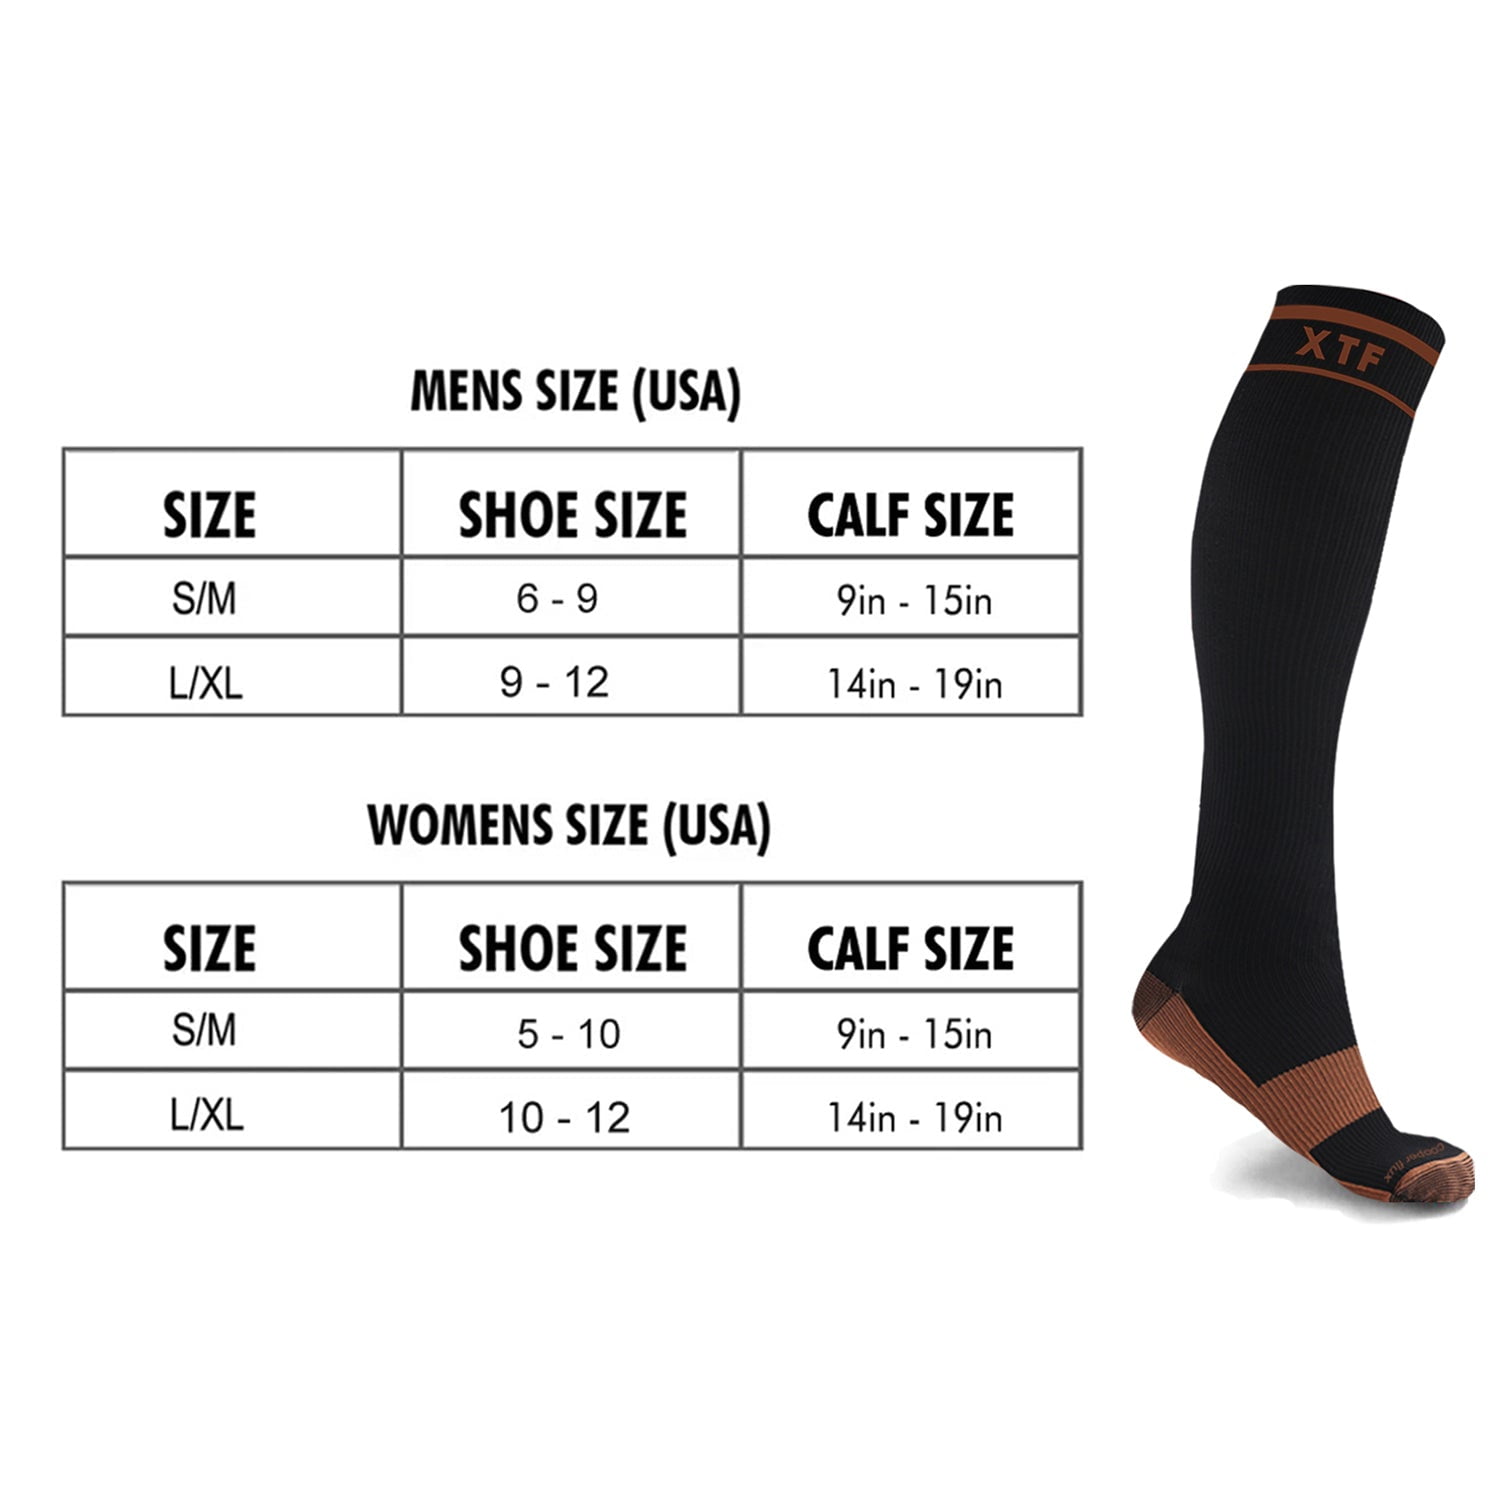  Copper Compression Socks (2 Pair) For Men Women 10-20 mmhg  below Knee Over the Calf For Sports Medical Travel (Black/Copper,  Small/Medium) : Clothing, Shoes & Jewelry